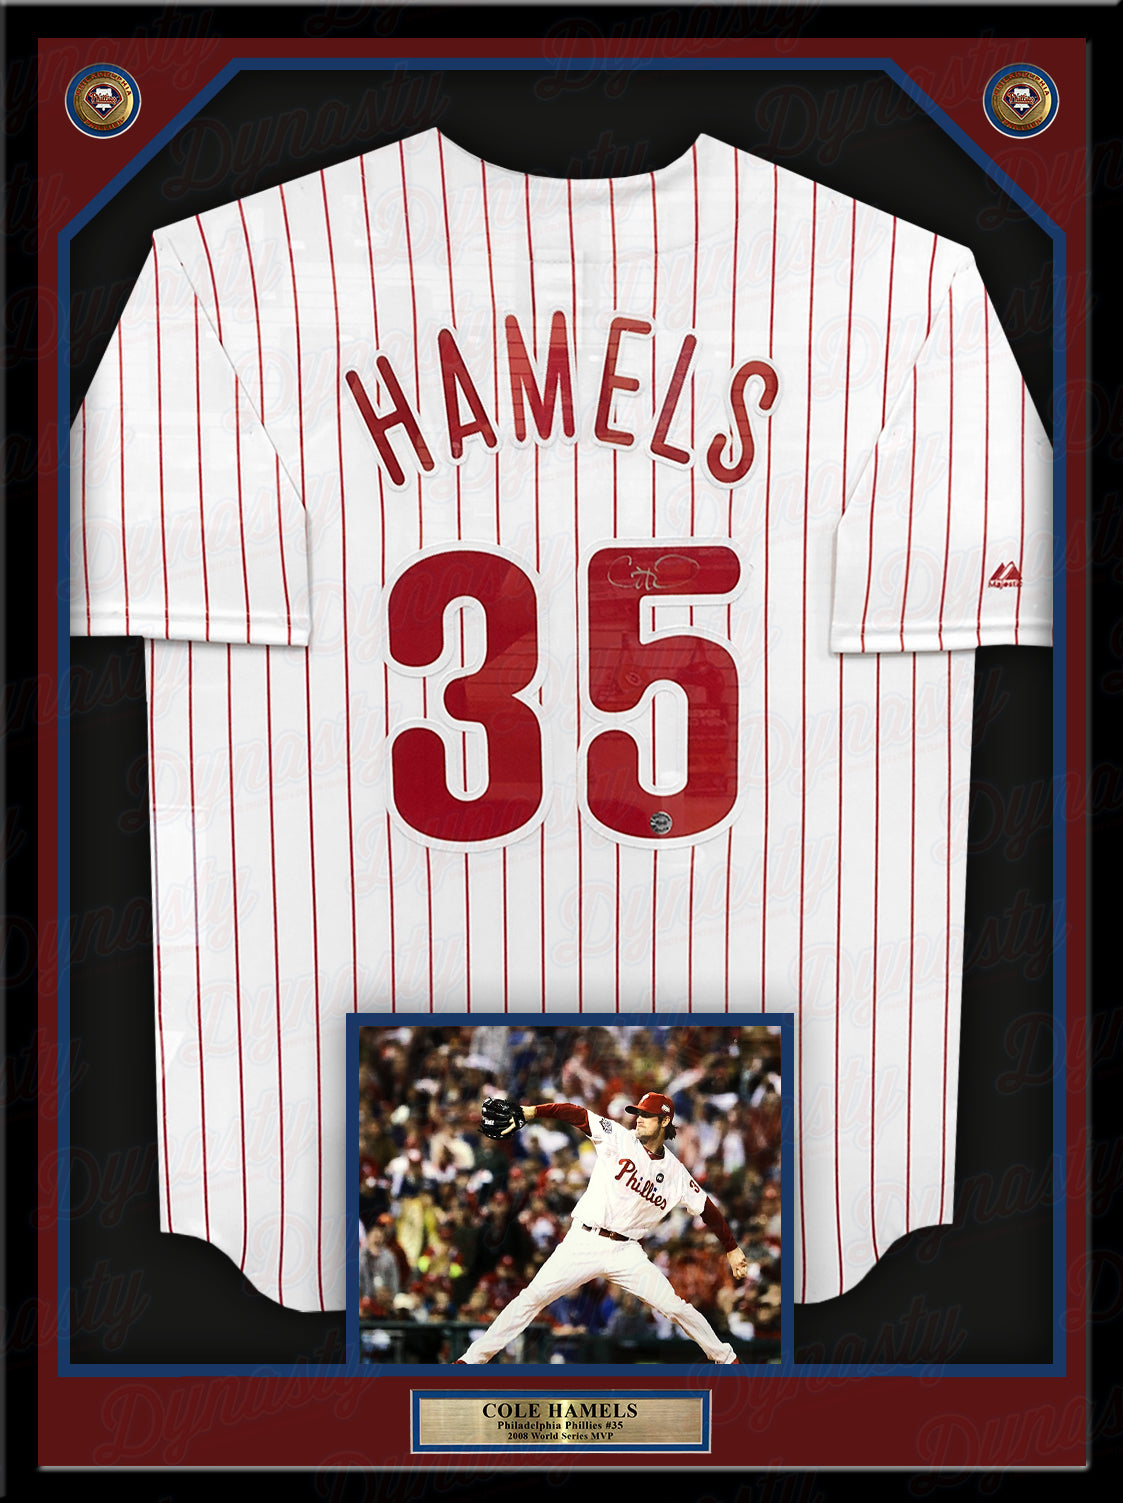 phillies game used jersey